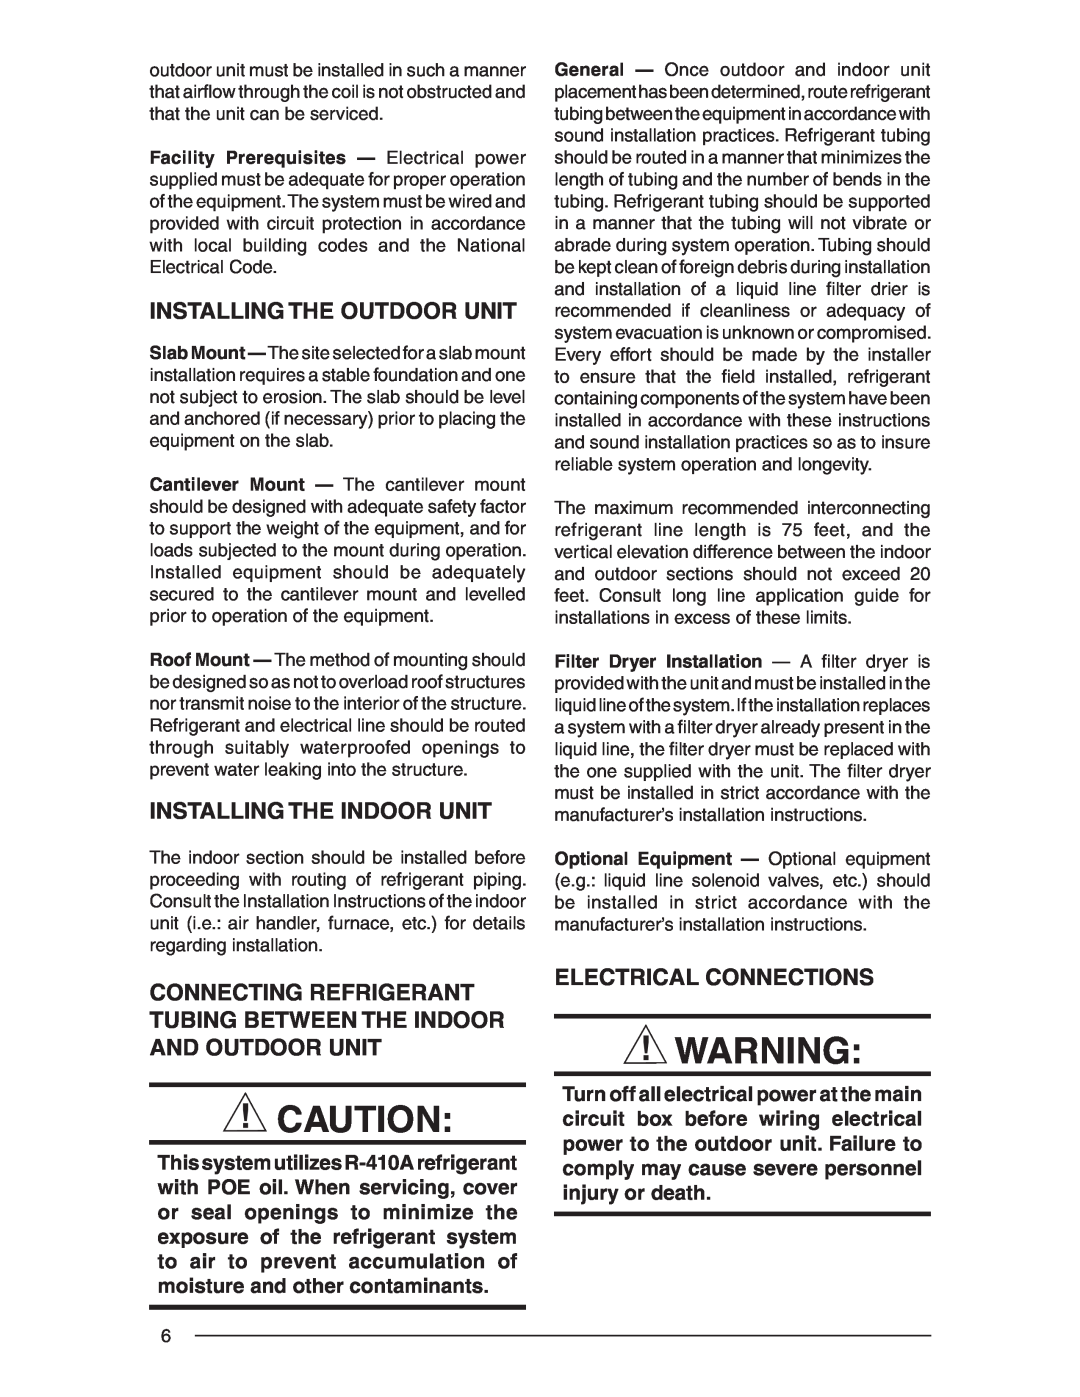 Nordyne R-410A installation instructions Installing The Outdoor Unit, Installing The Indoor Unit, Electrical Connections 